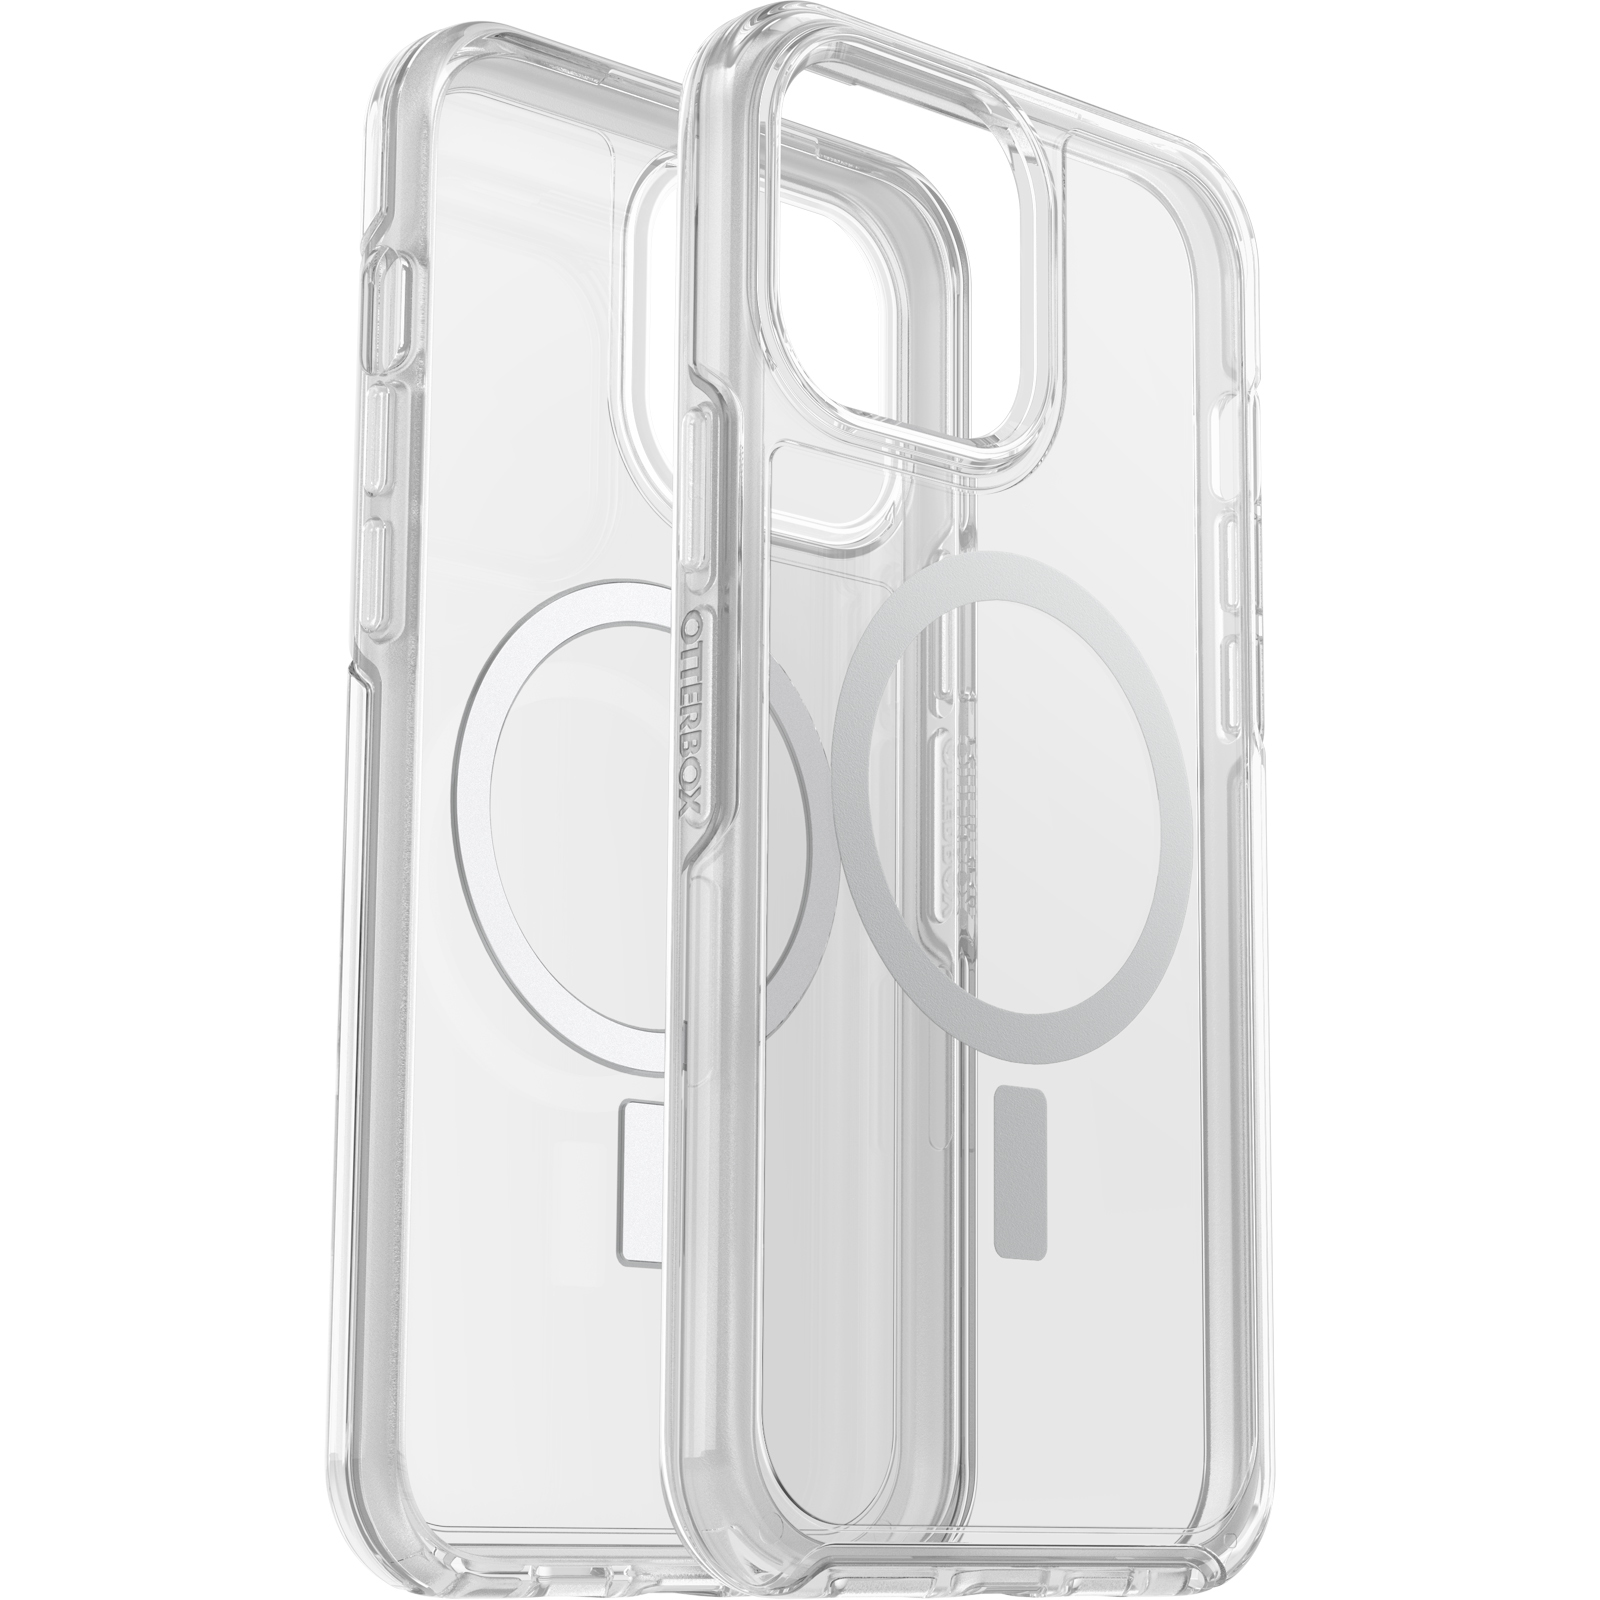 77-84805 OtterBox Symmetry+ Clear Apple iPhone 13 Pro Max/iPhone 12 Pro Max - clear 1